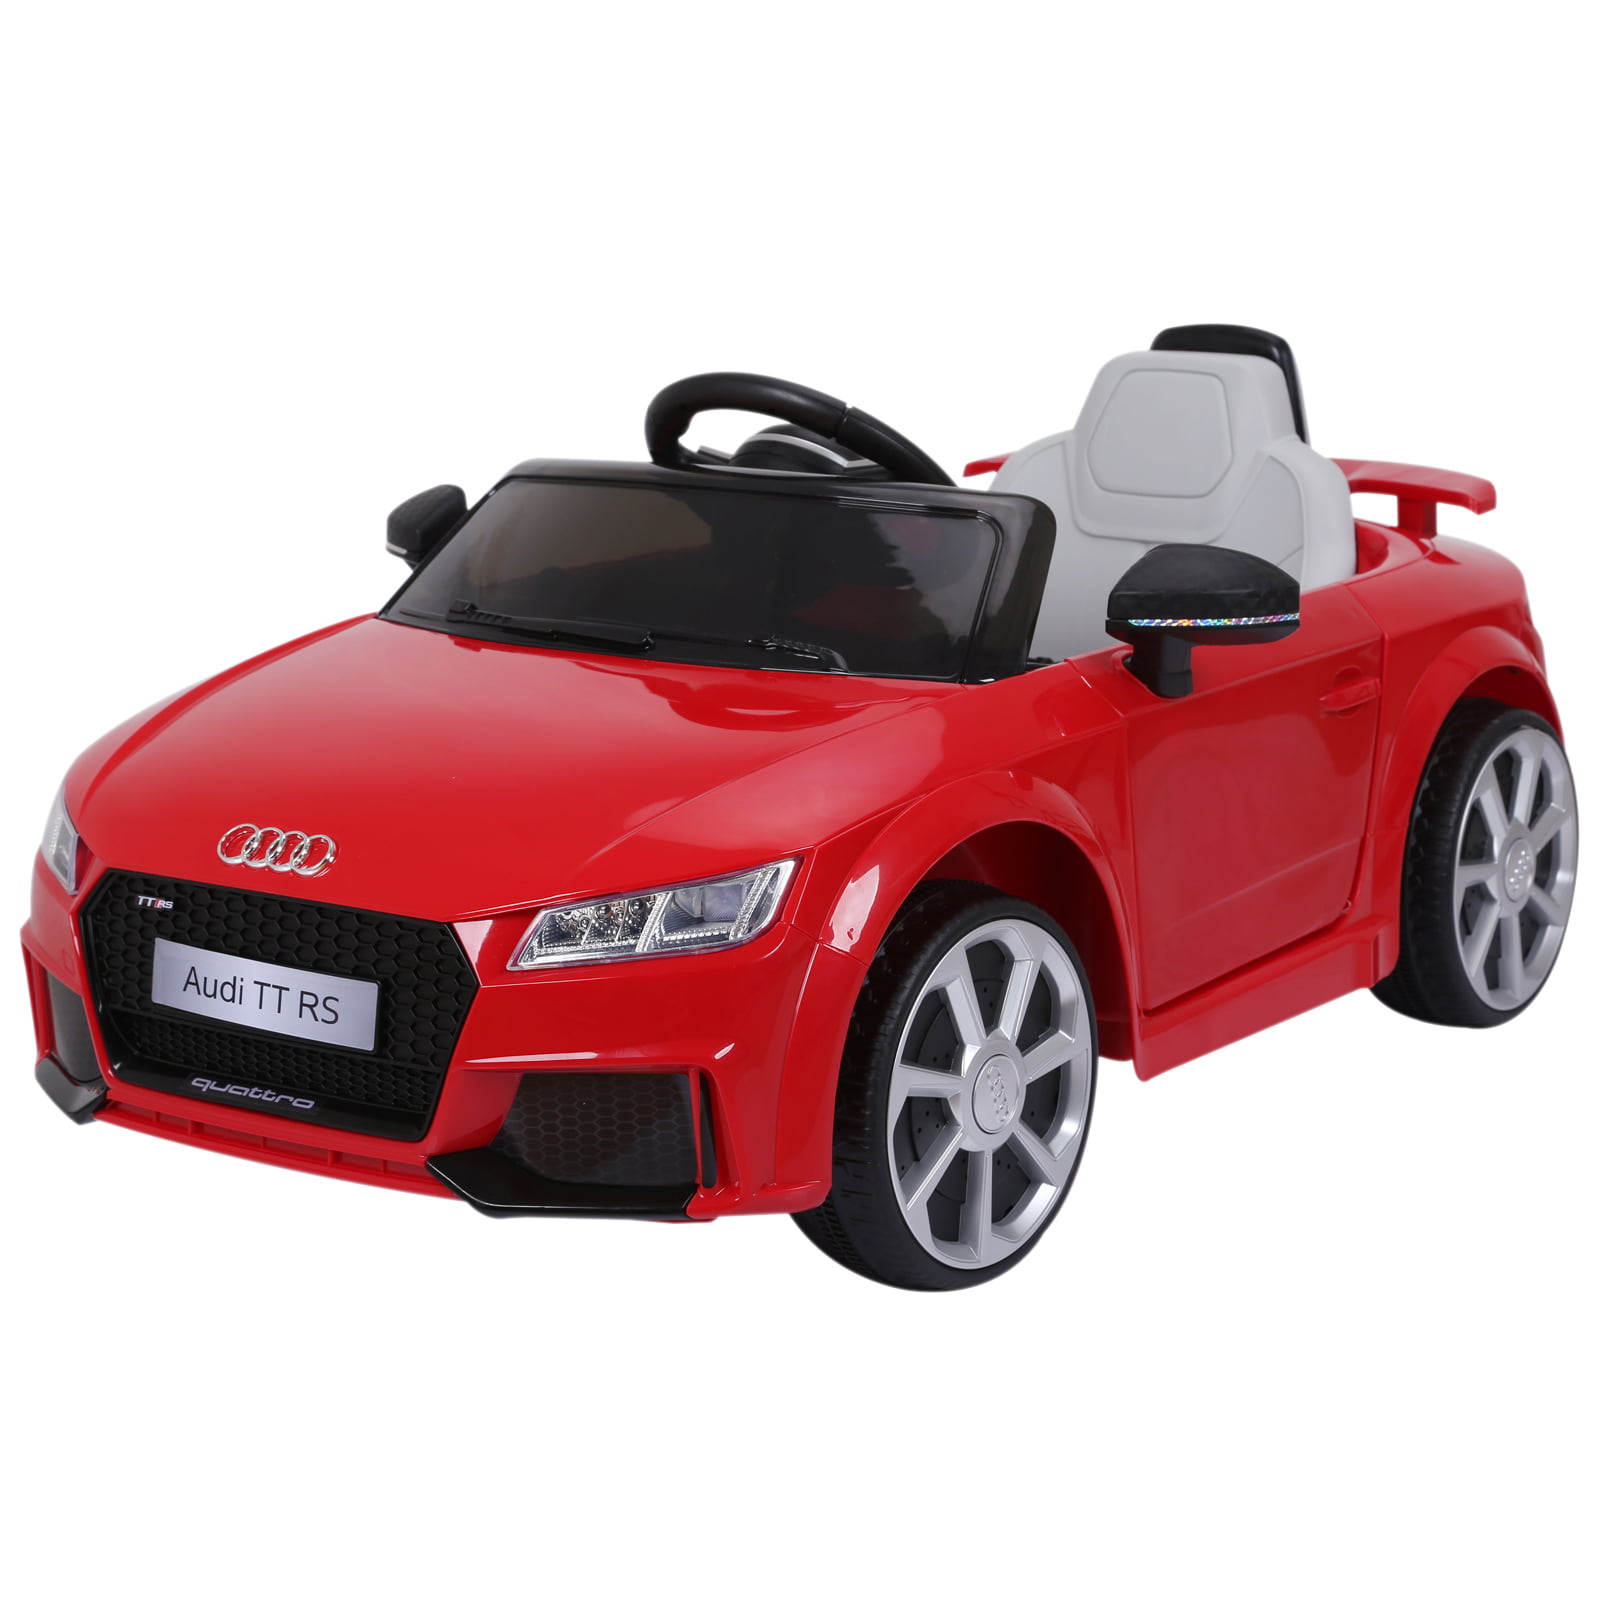 Personalised kids Number Plate for KID MOTORZ 6V Audi TT RS ride-on toy car REAR 